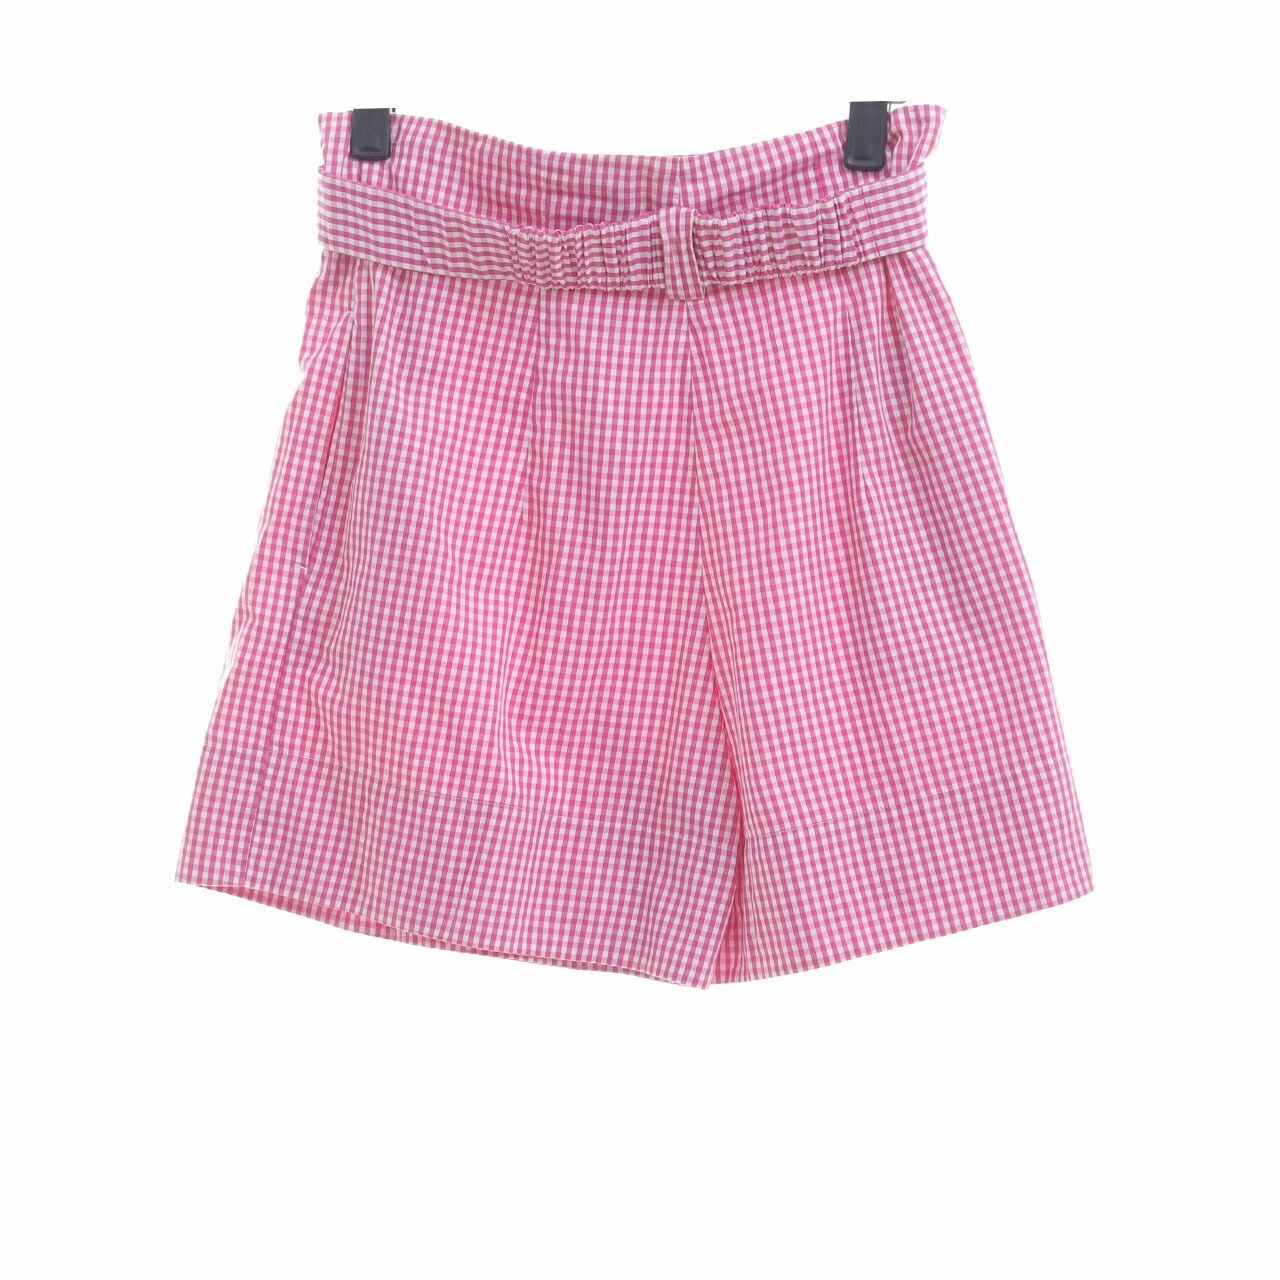 N°21 Gingham Check Pink Belted Shorts Pants